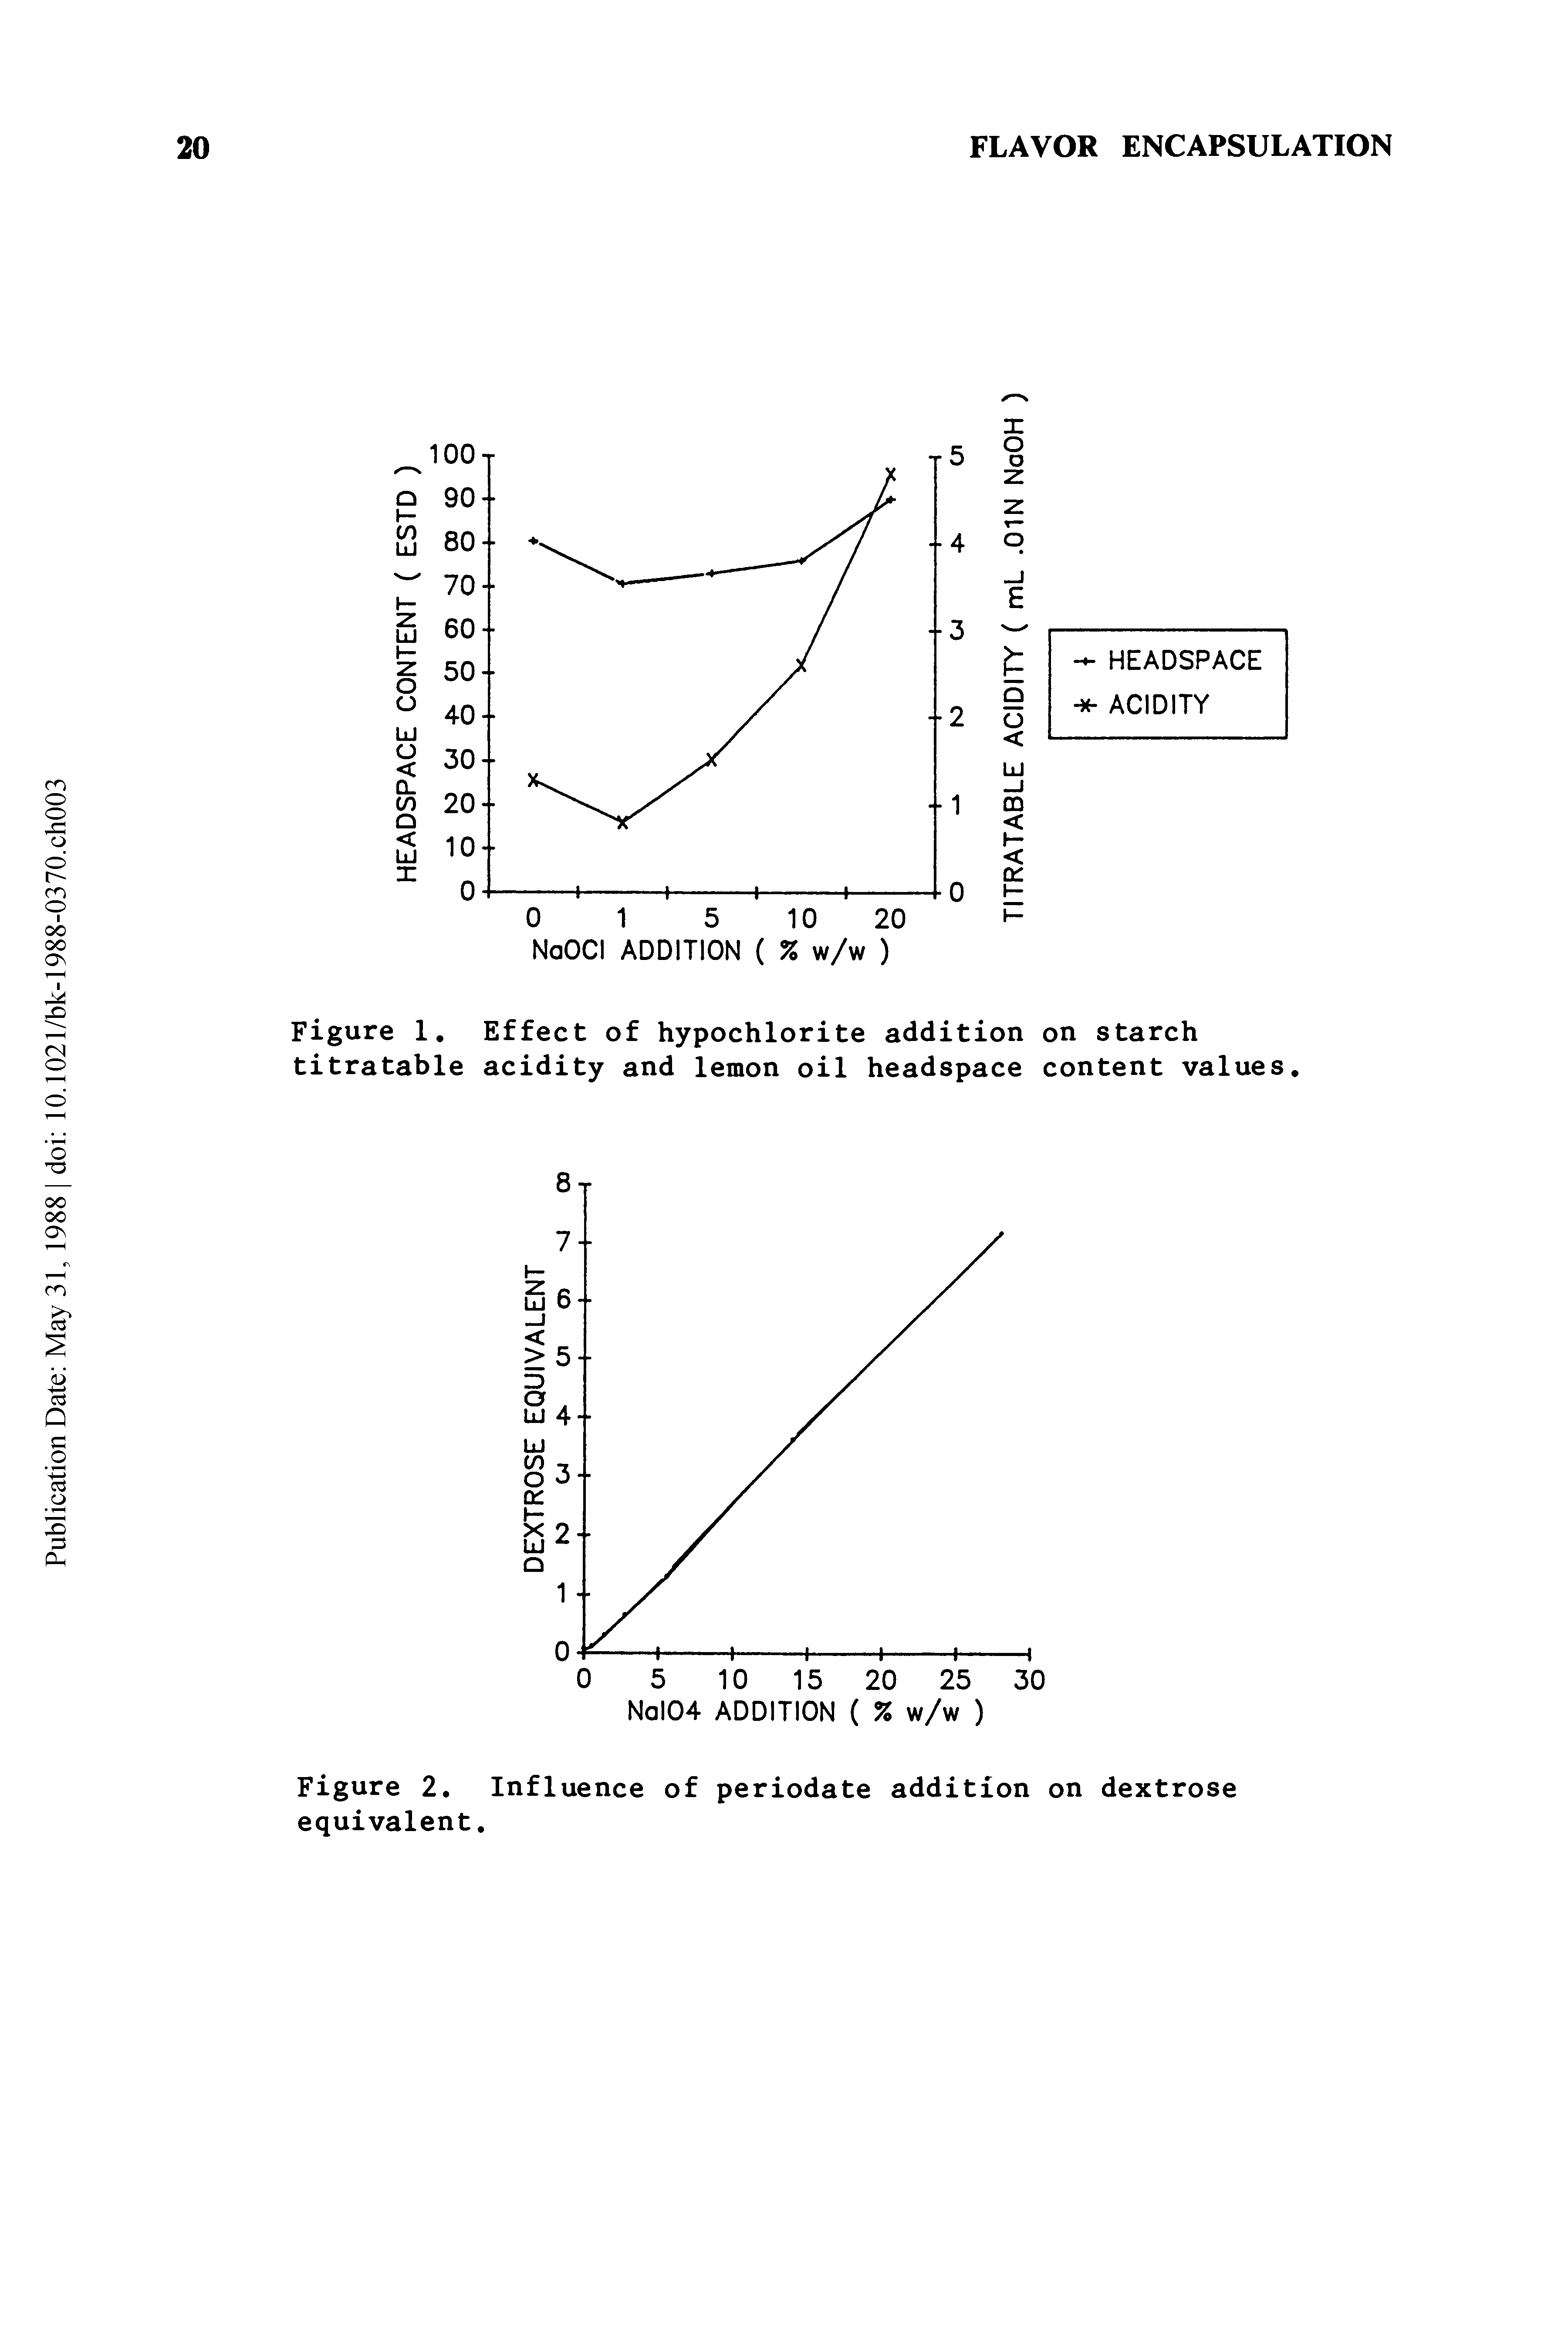 Figure 2. Influence of periodate addition on dextrose equivalent.